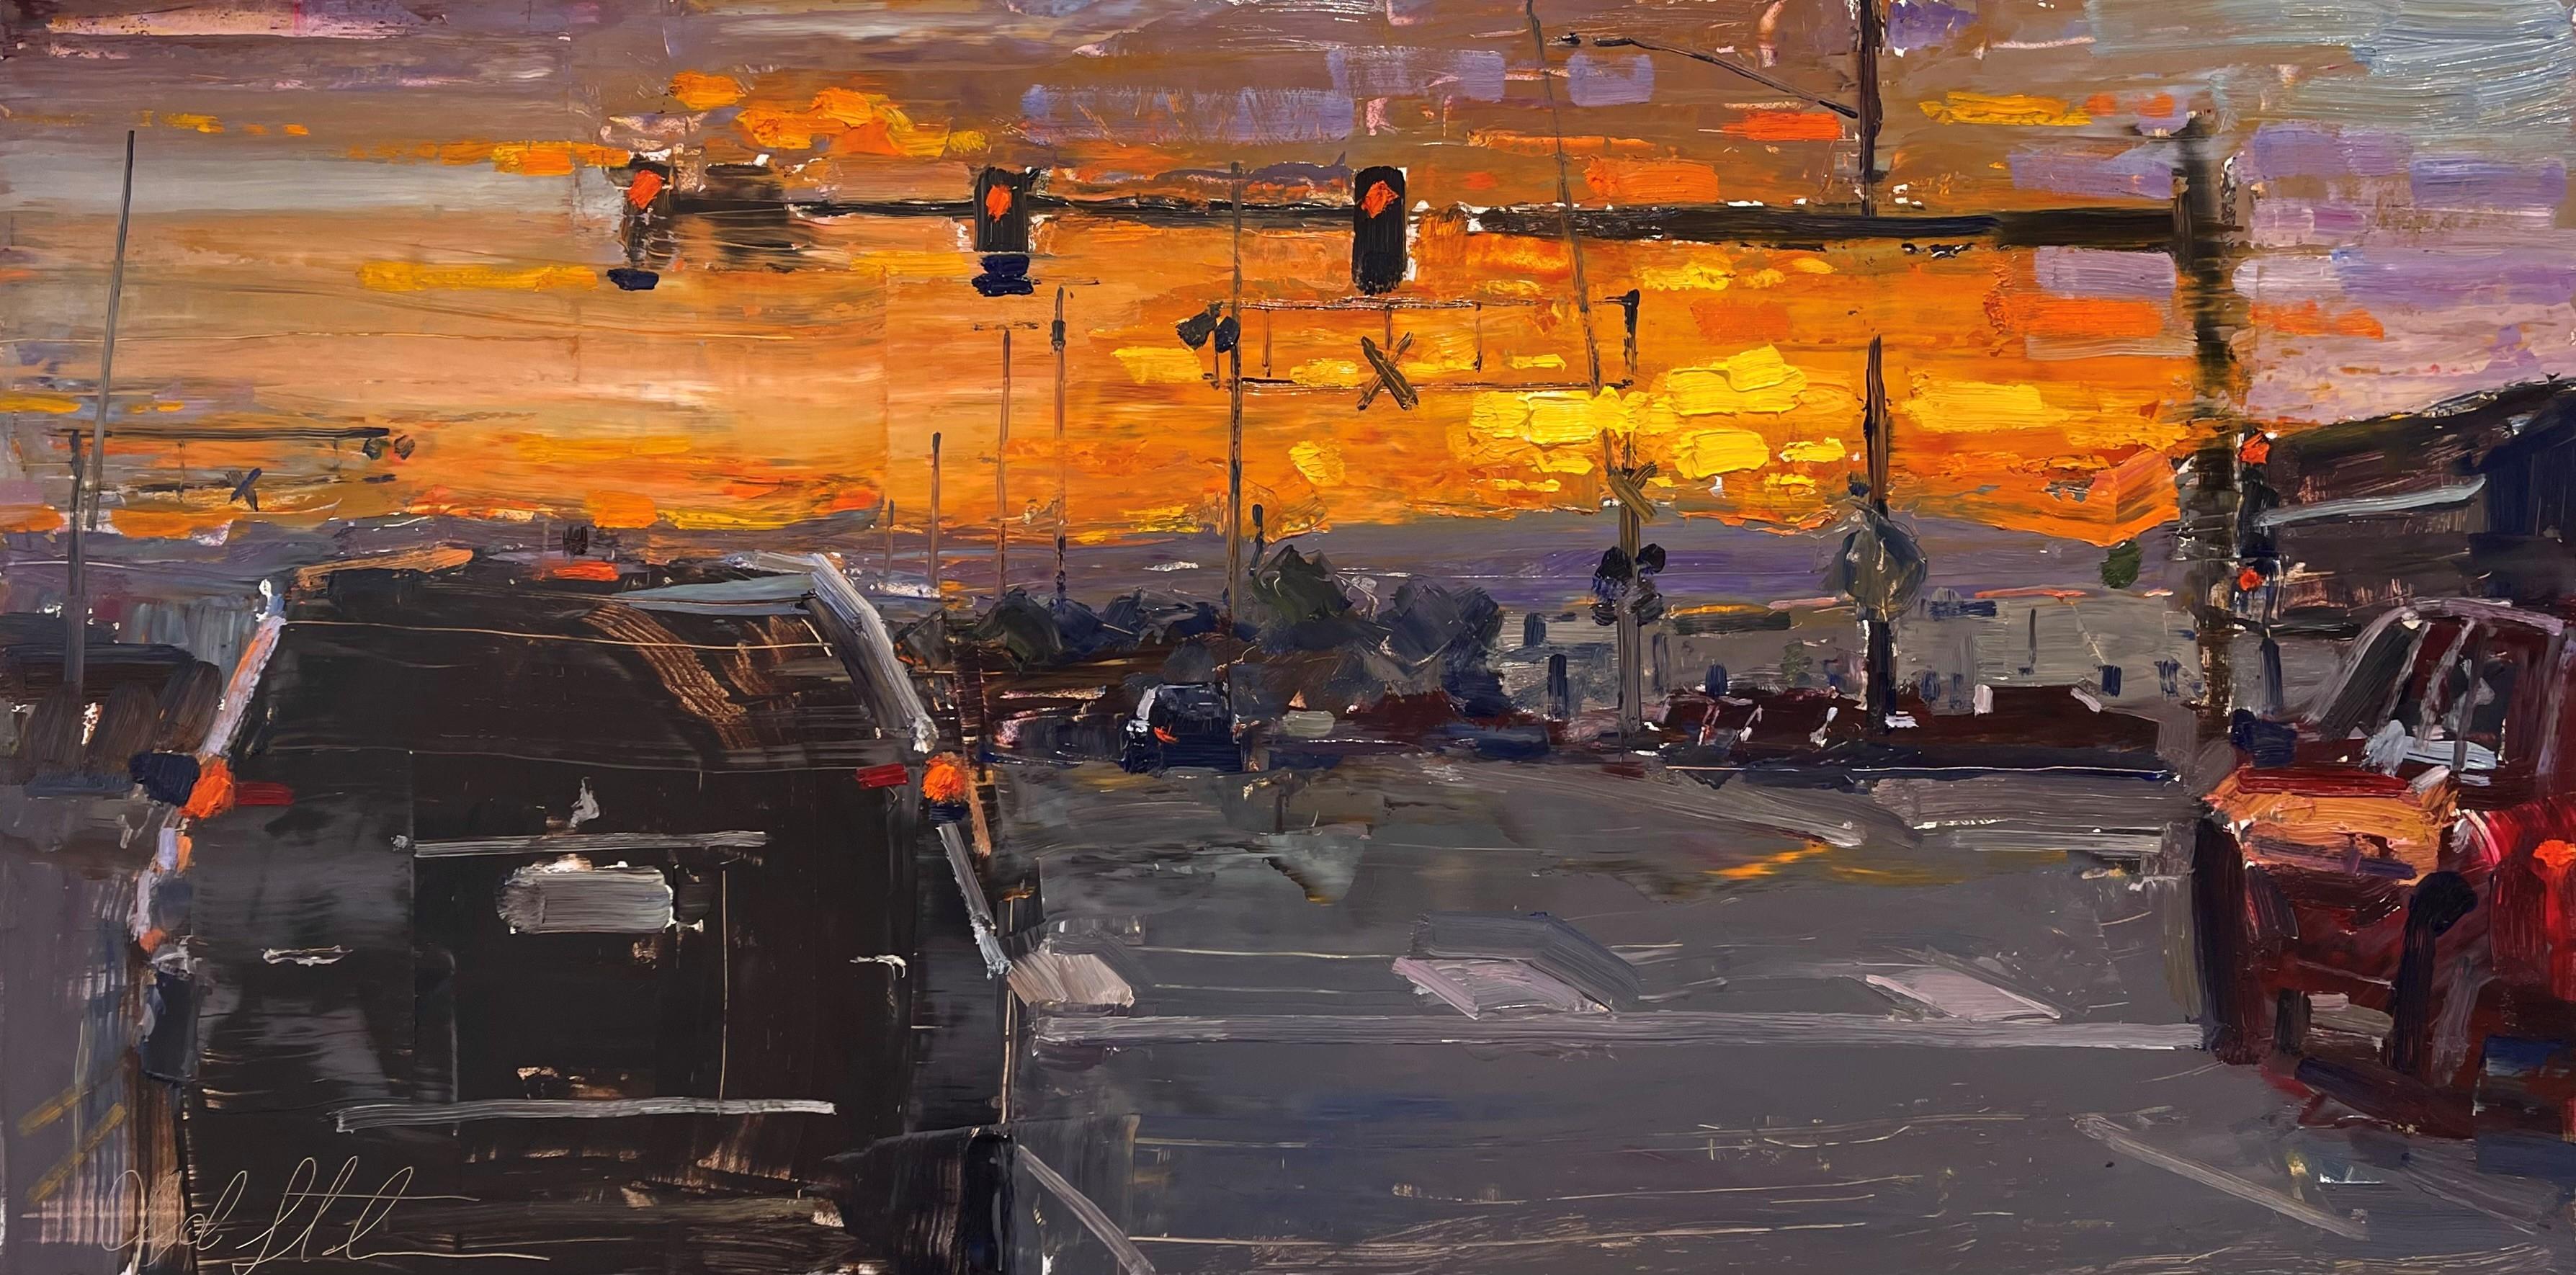 Clyde Steadman Figurative Painting - "Commerce City Sunset" Oil Painting